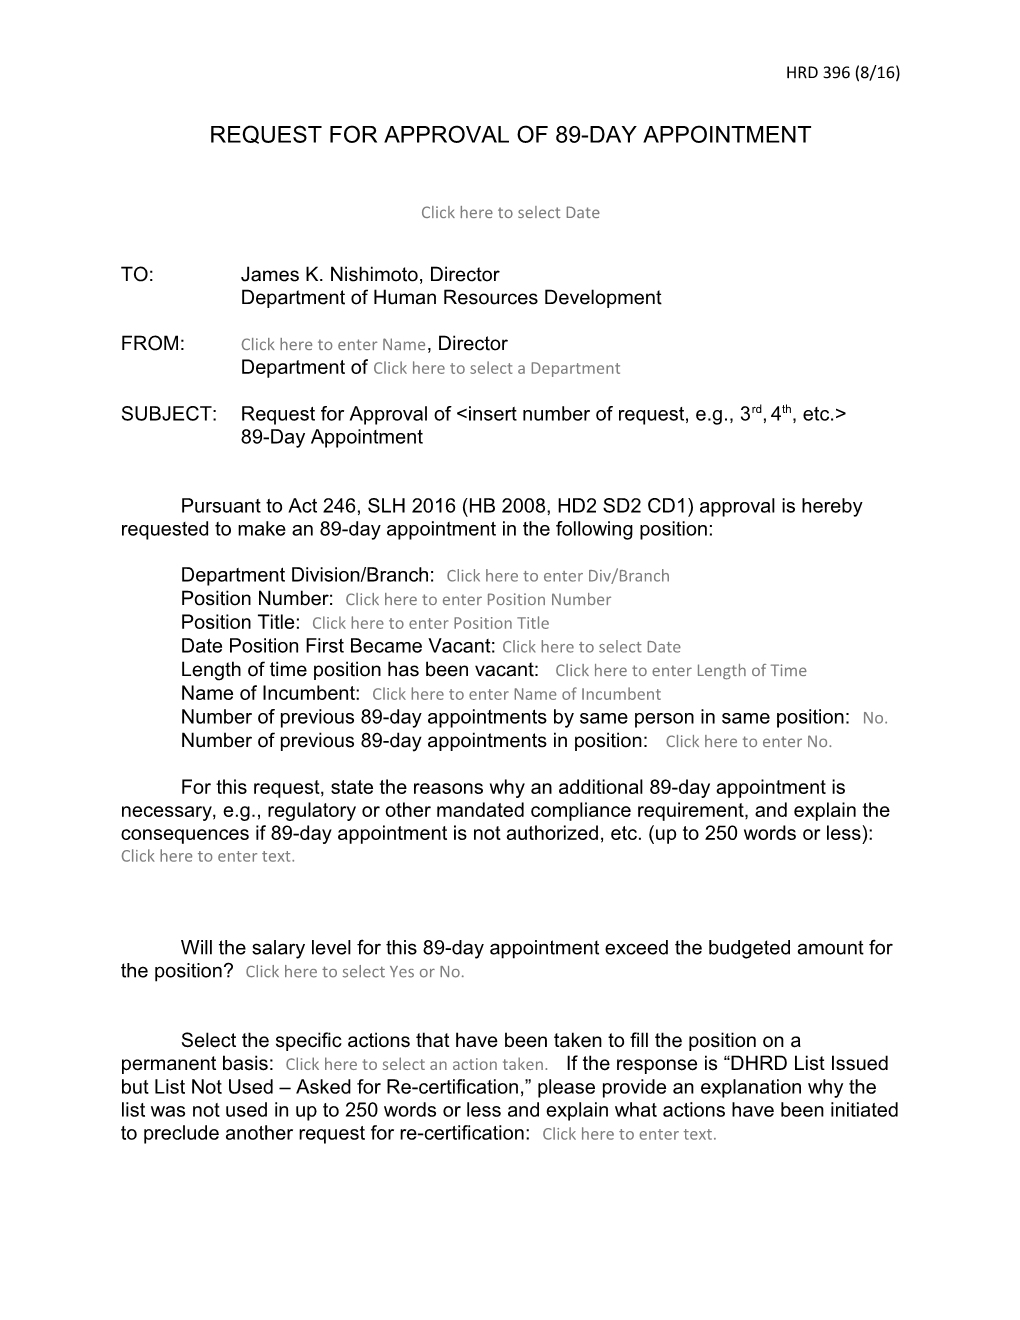 Request for Approval of 89-Day Appointment